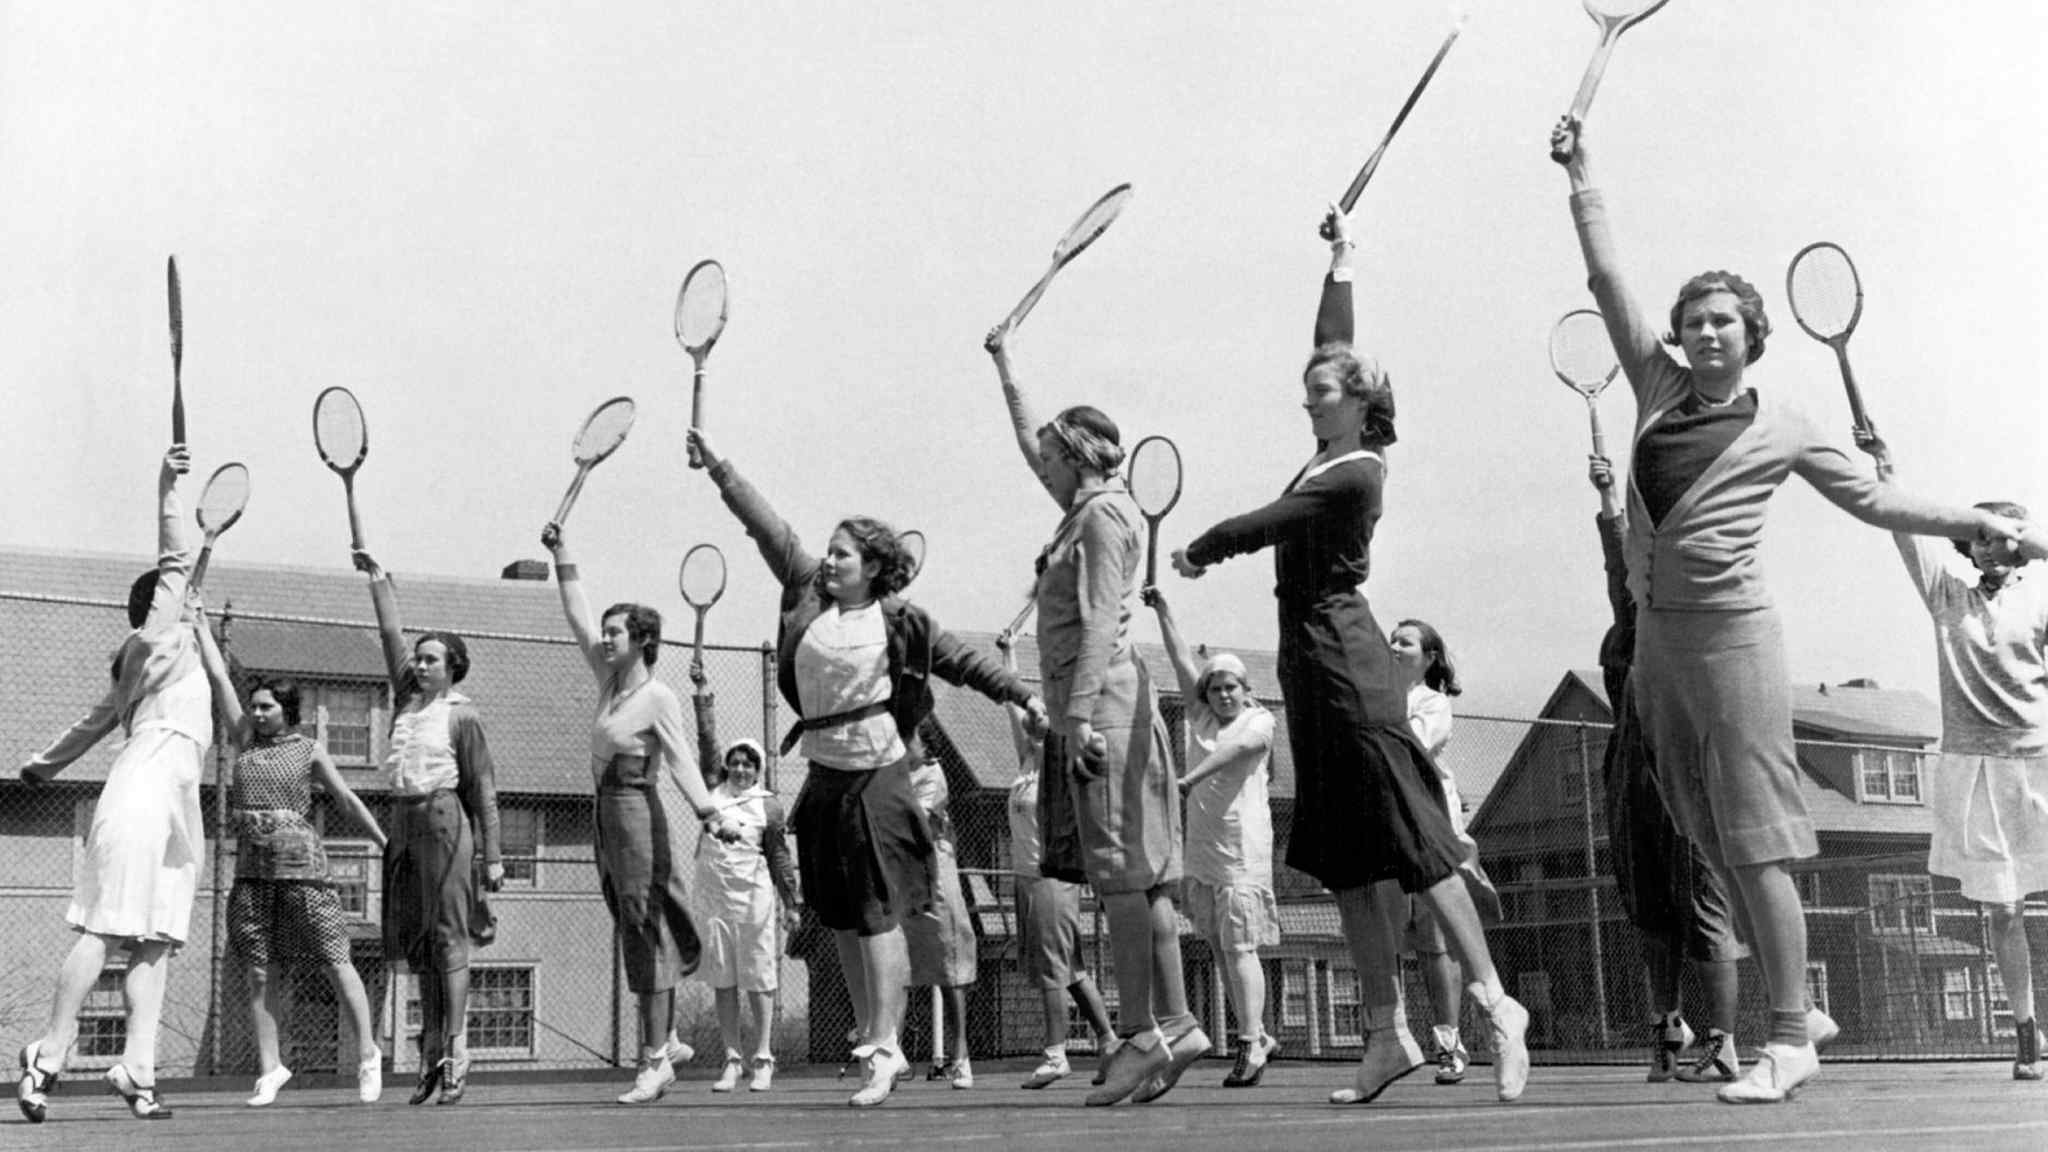 String theory: the evolution of the tennis racket 